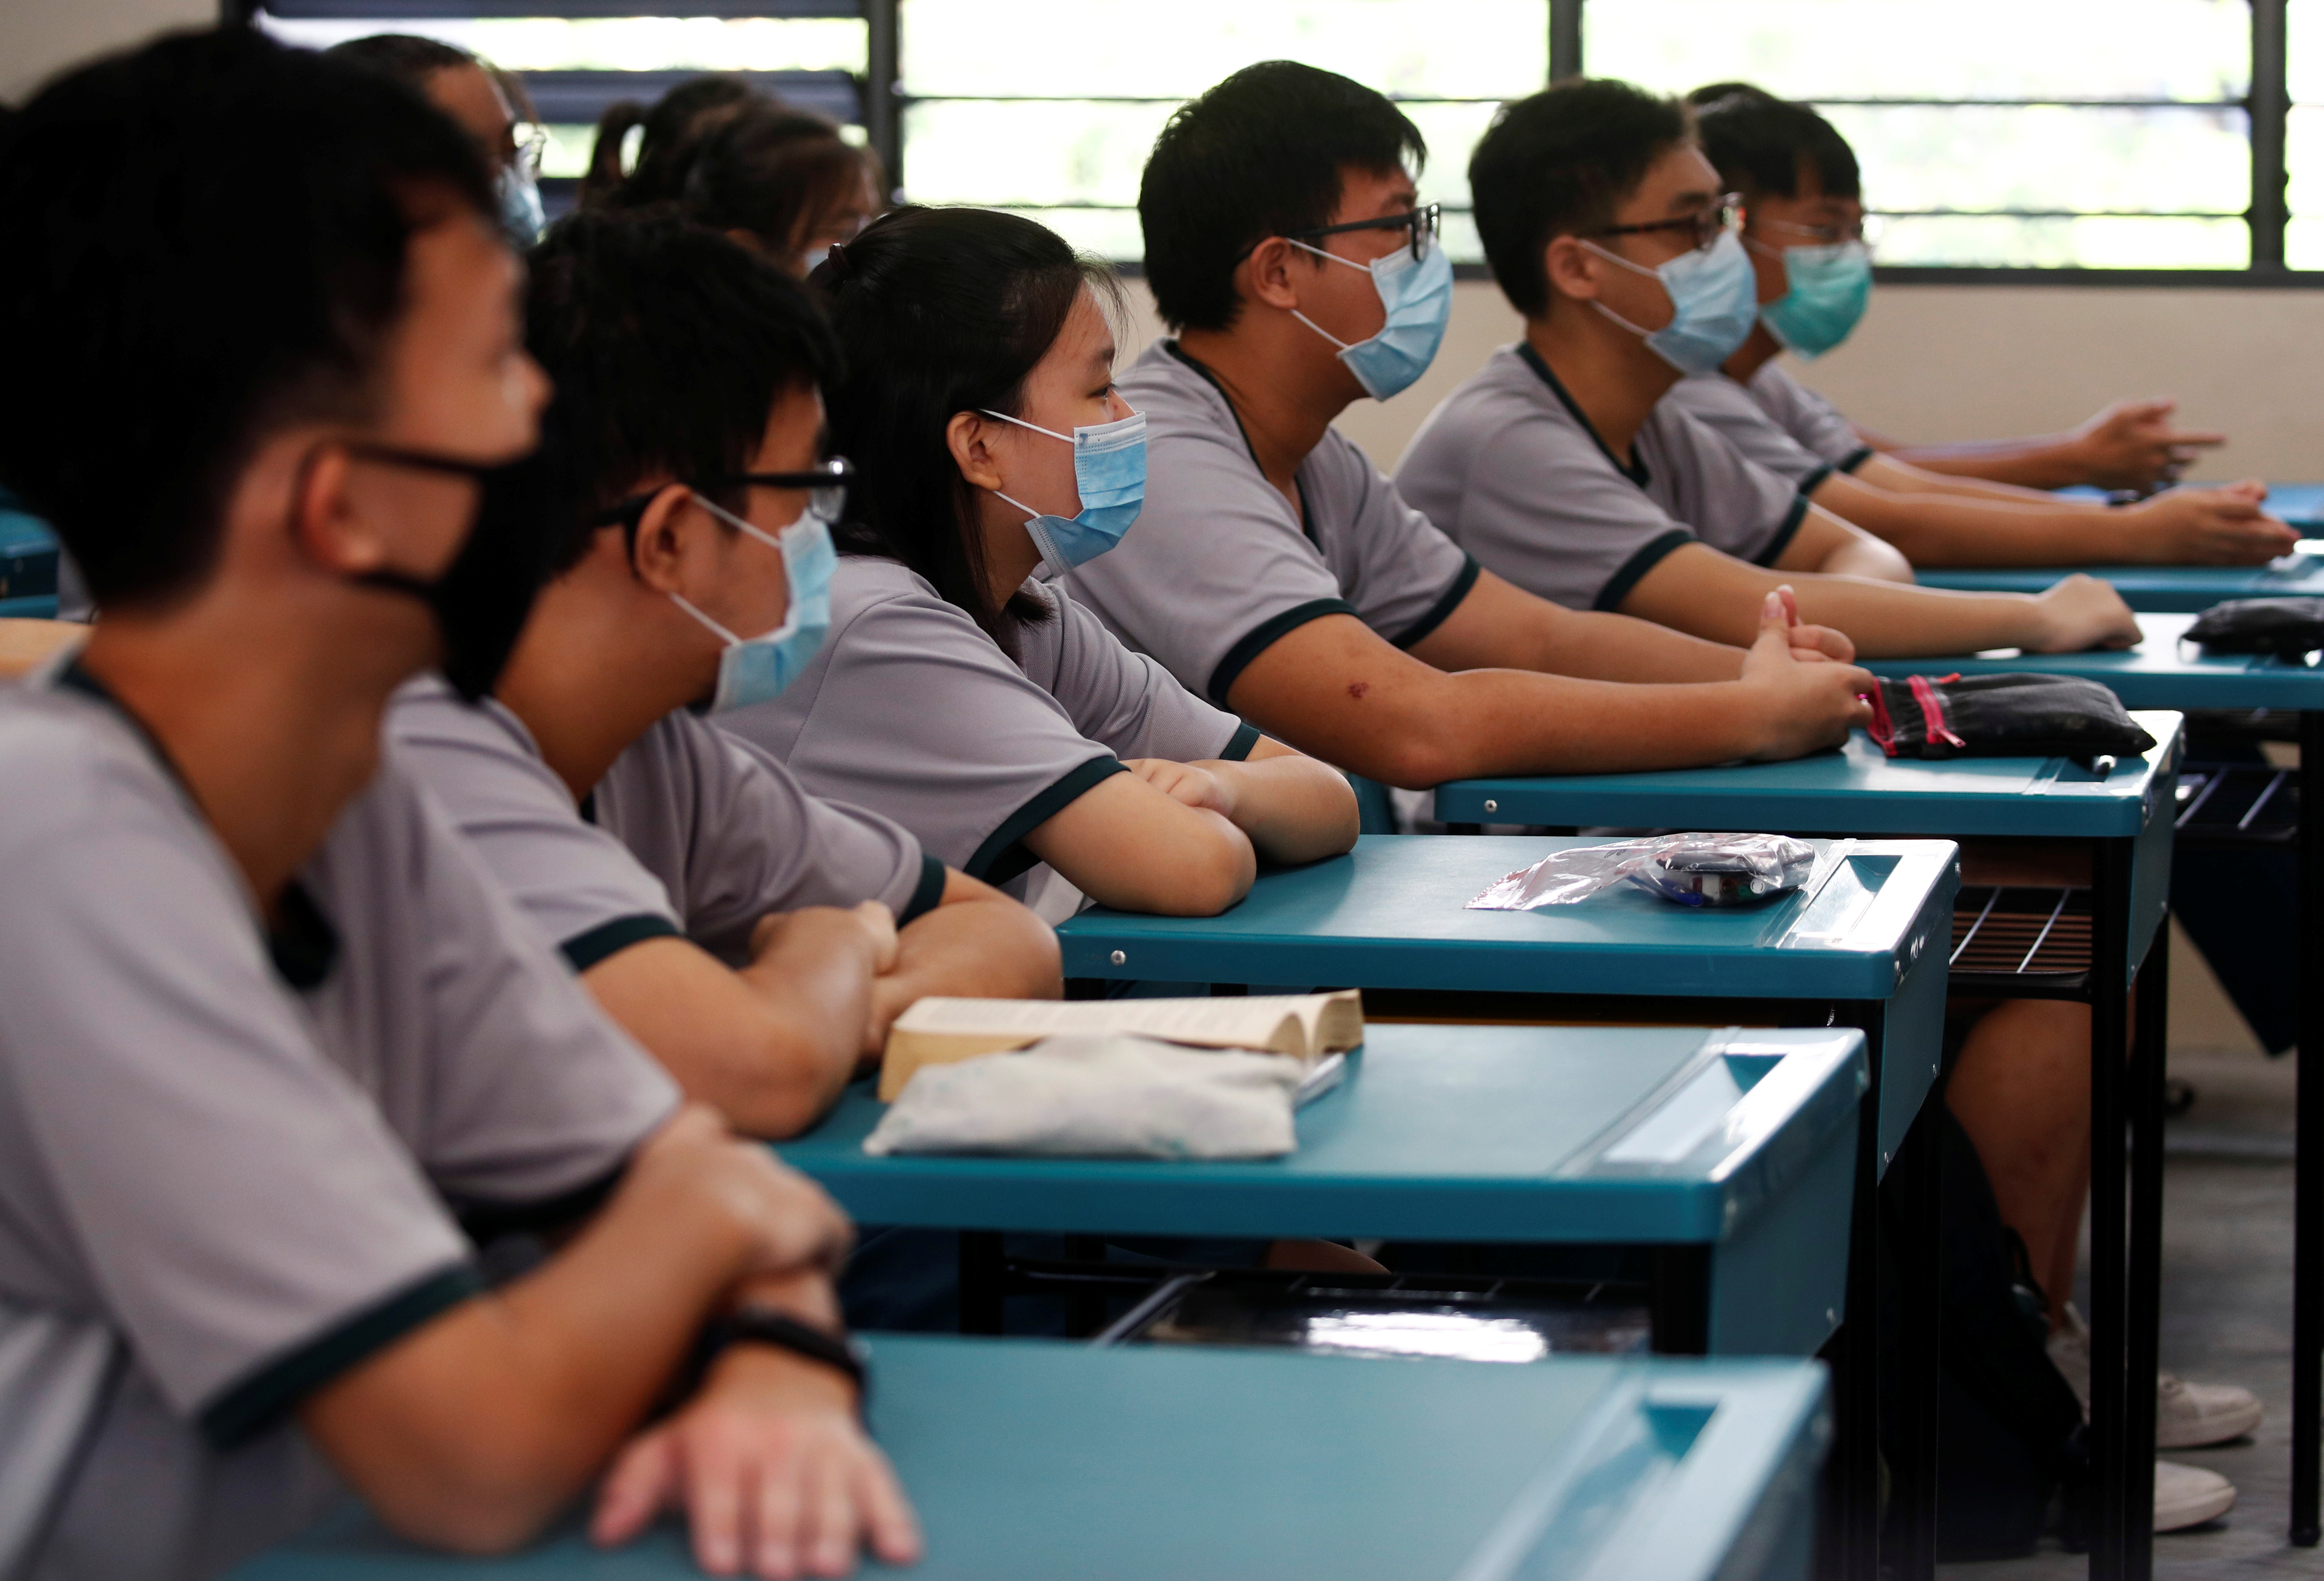 Students wearing protective face masks attend a class at Yio Chu Kang Secondary School, as schools reopen amid the coronavirus disease (COVID-19) outbreak in Singapore June 2, 2020.  REUTERS/Edgar Su